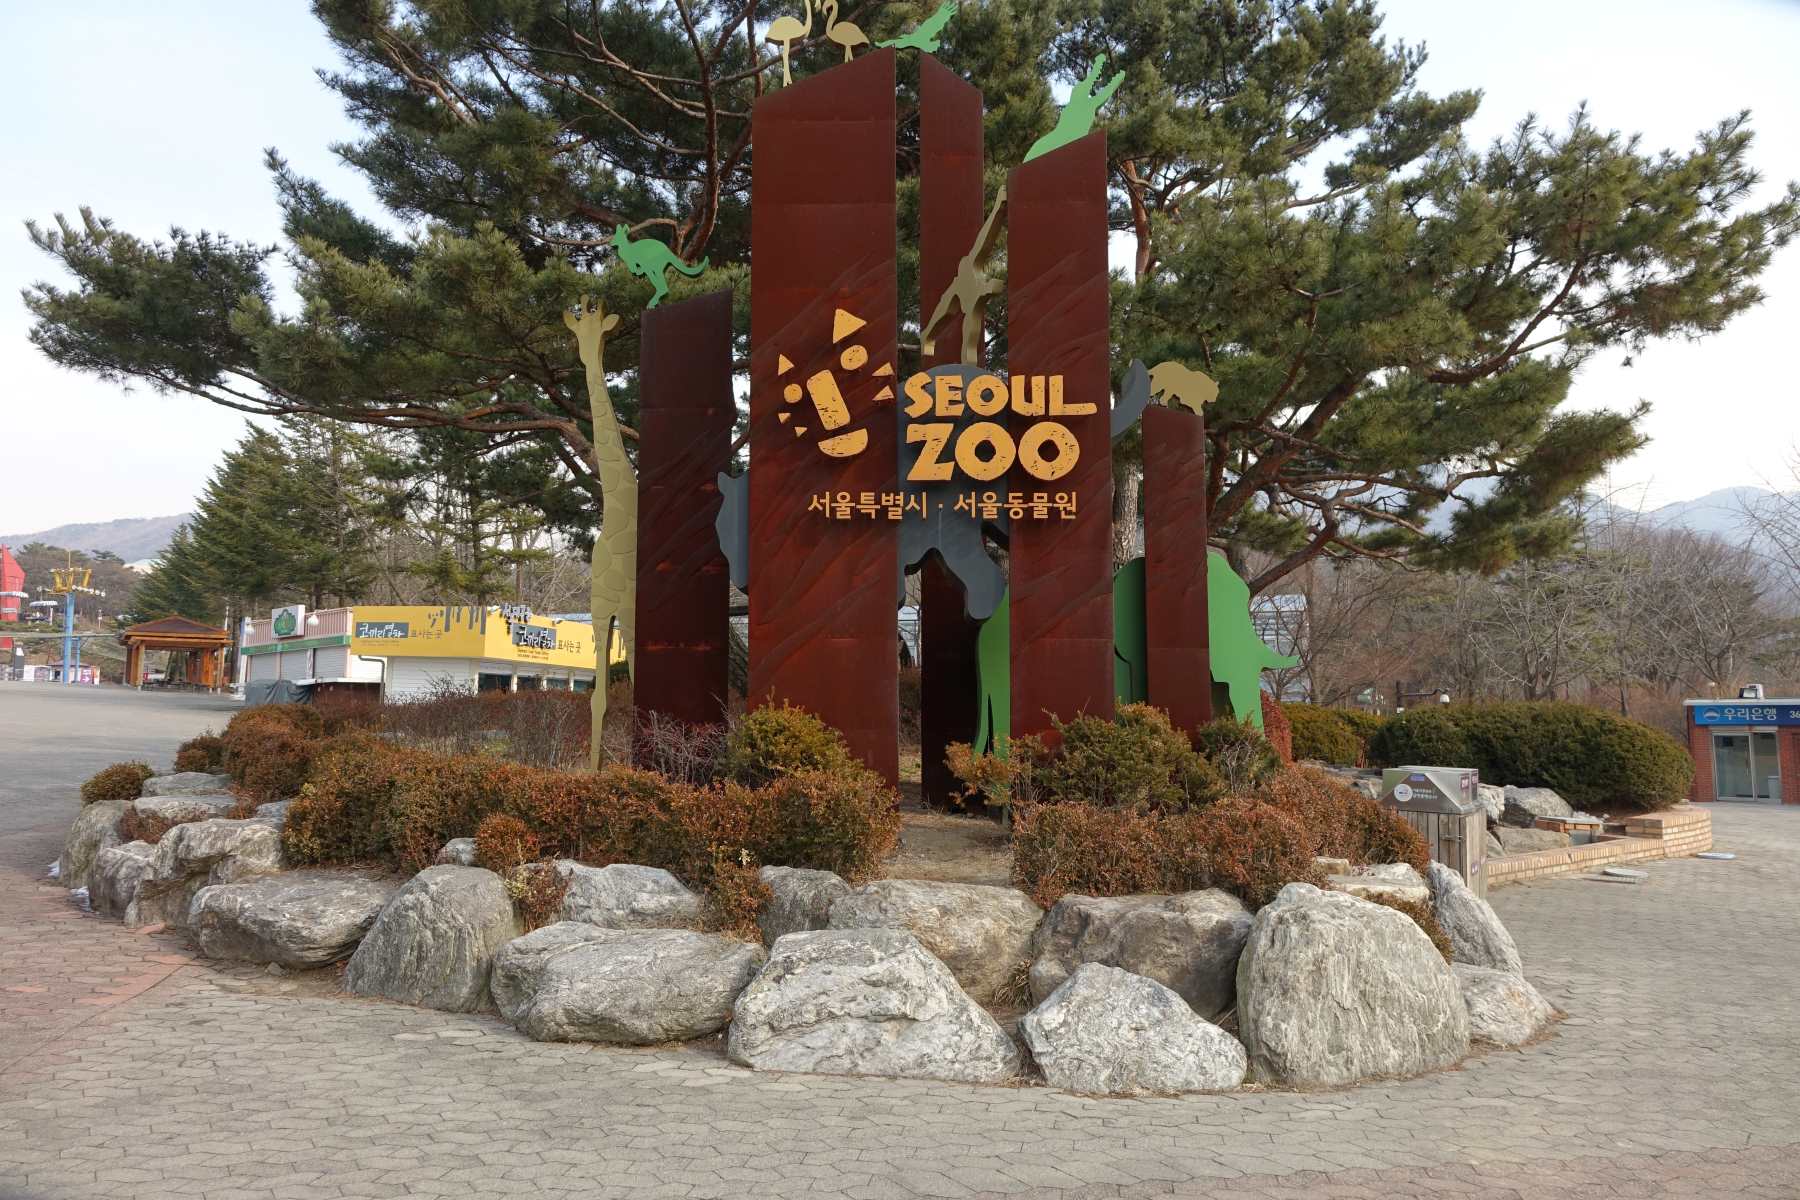 12 Fascinating Facts About Seoul Grand Park Zoo - Facts.net